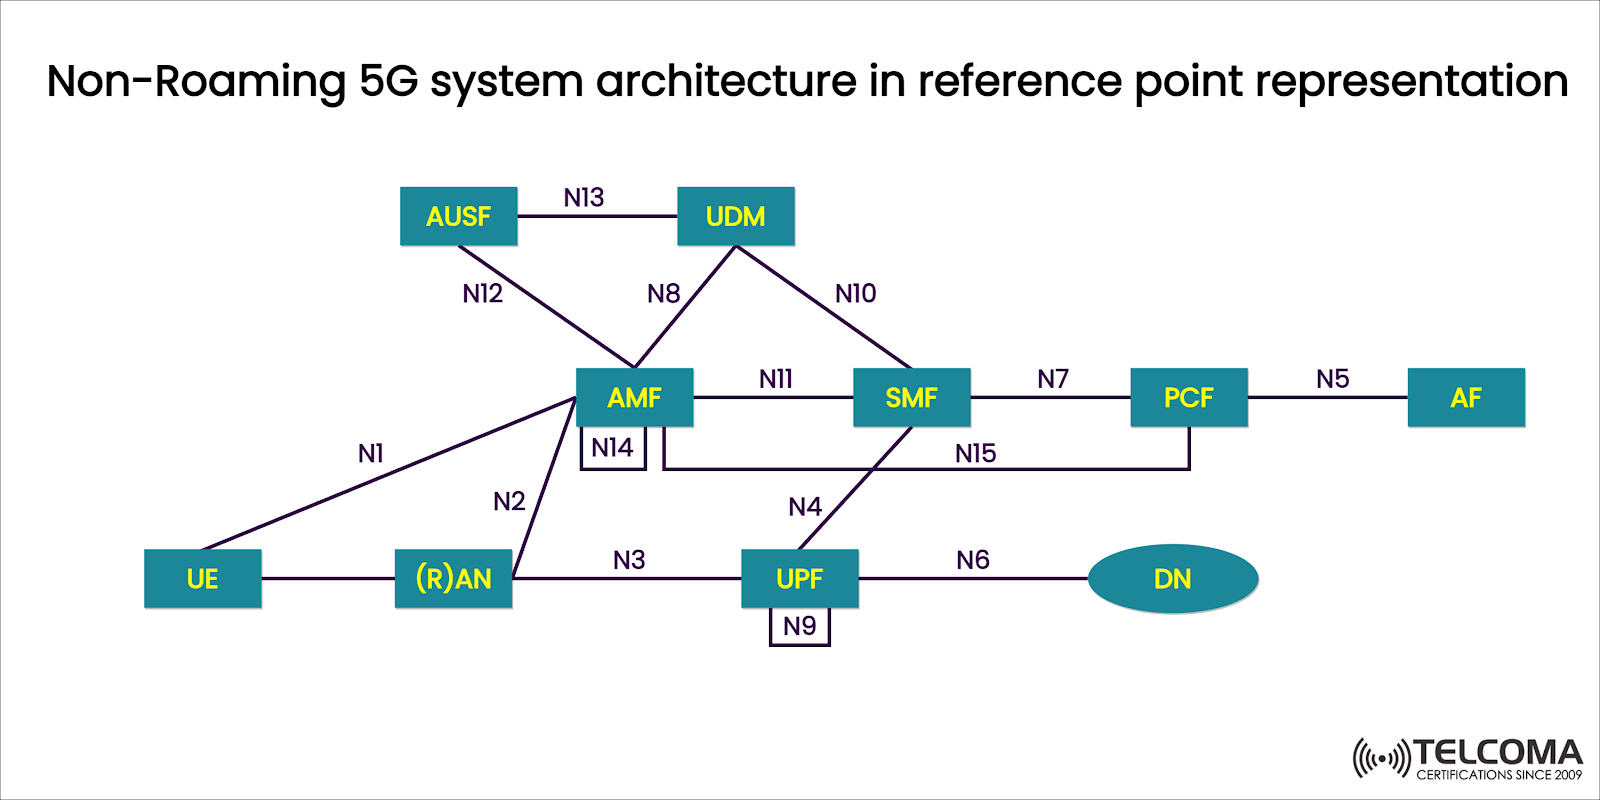 Non-Roaming 5G system architecture in reference point representation 